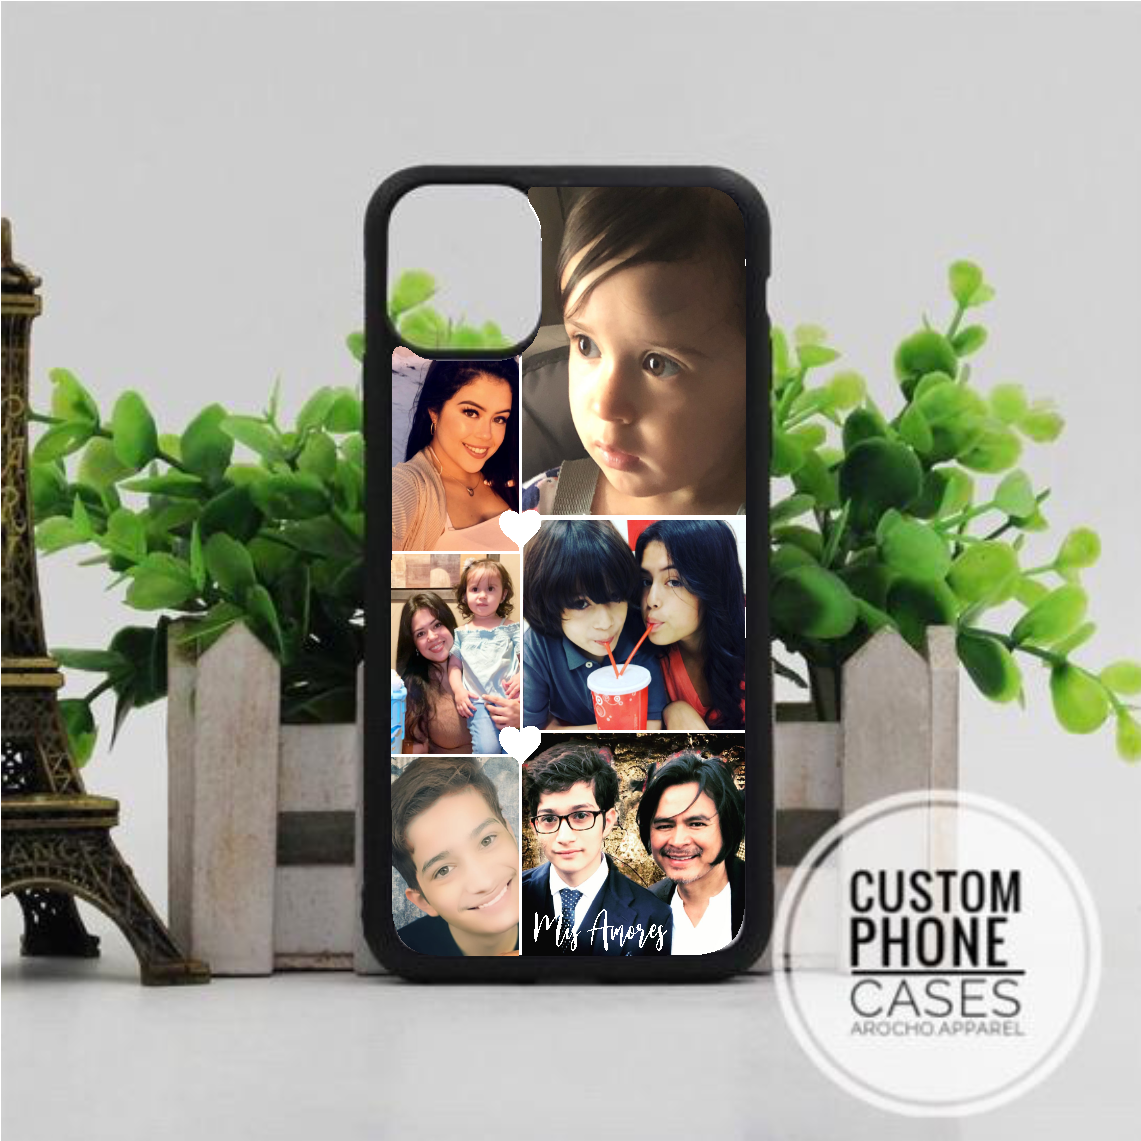 Galaxy personalized custom phone cases